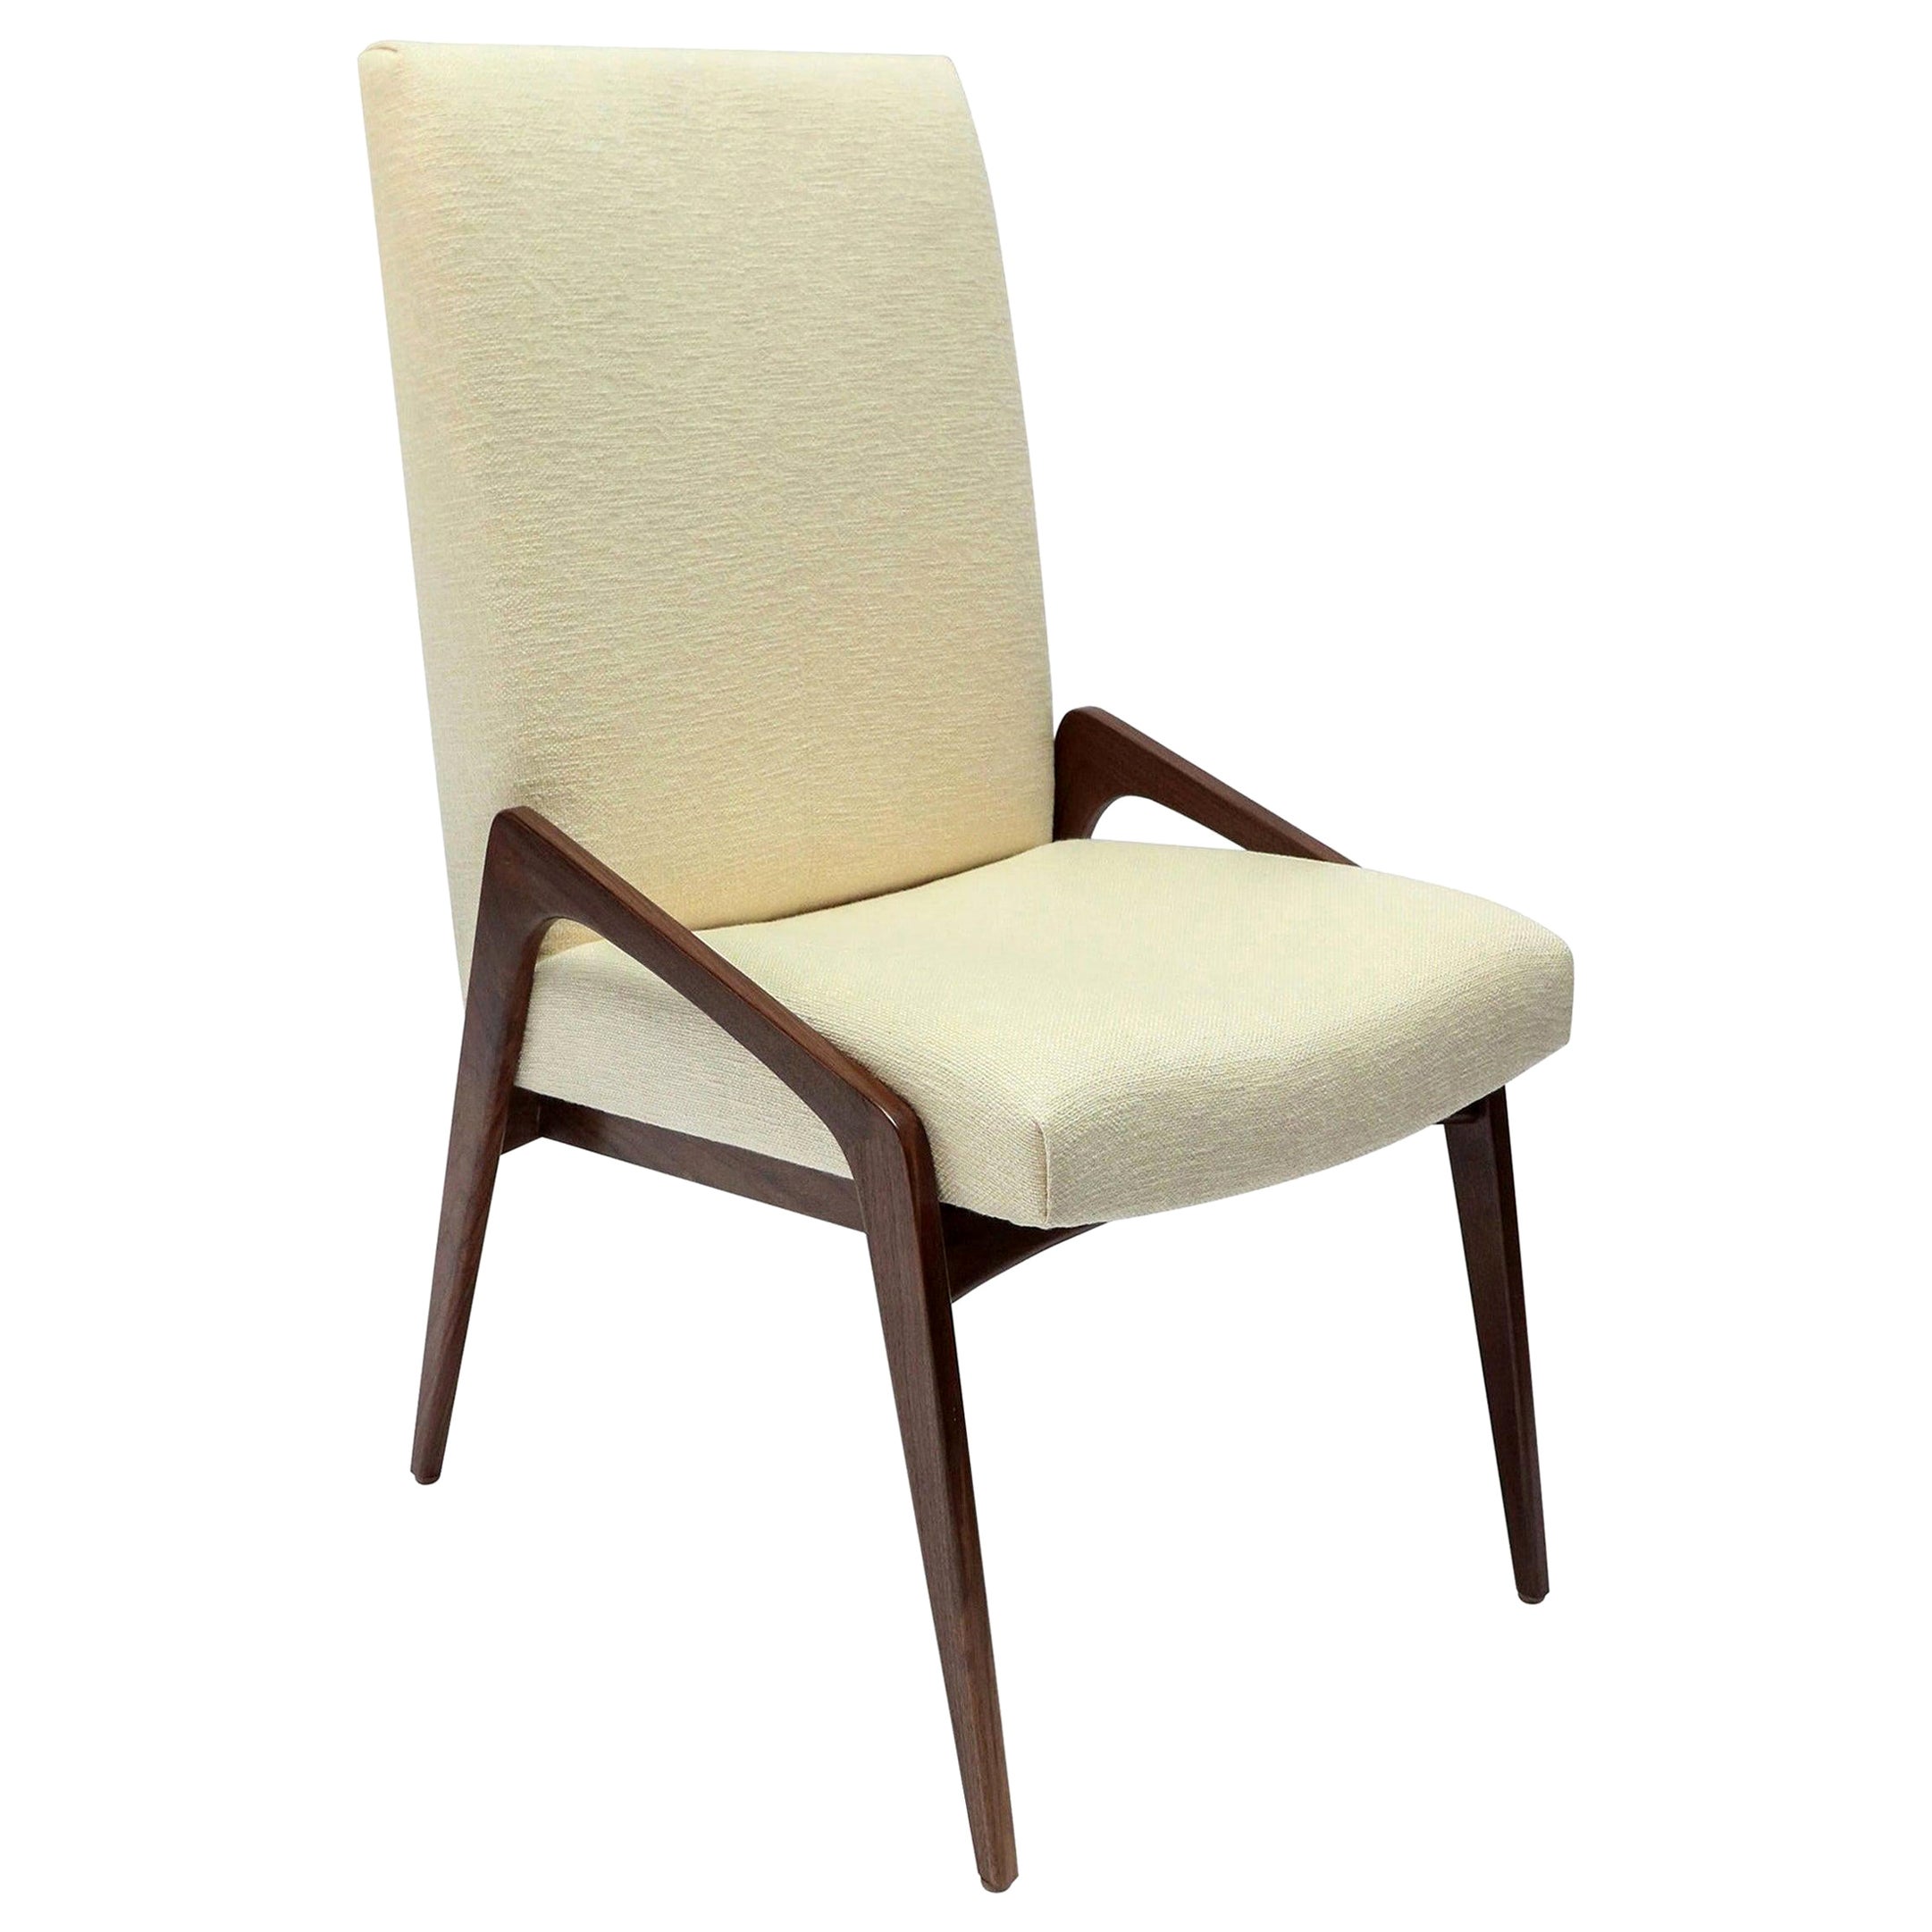 Custom Midcentury Style Walnut Dining Chairs in Ivory Linen by Adesso Imports